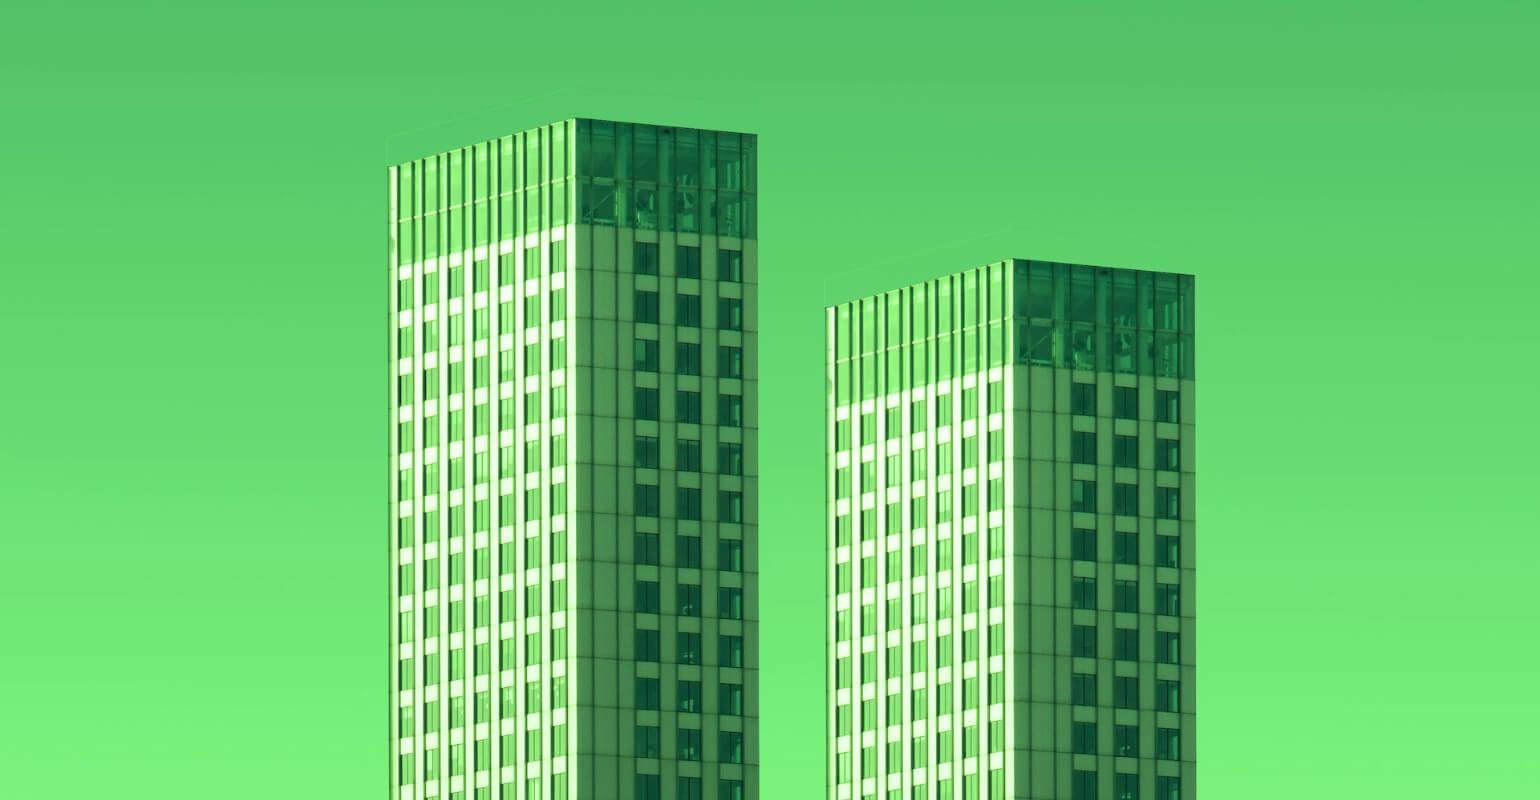 A building photo with green tone